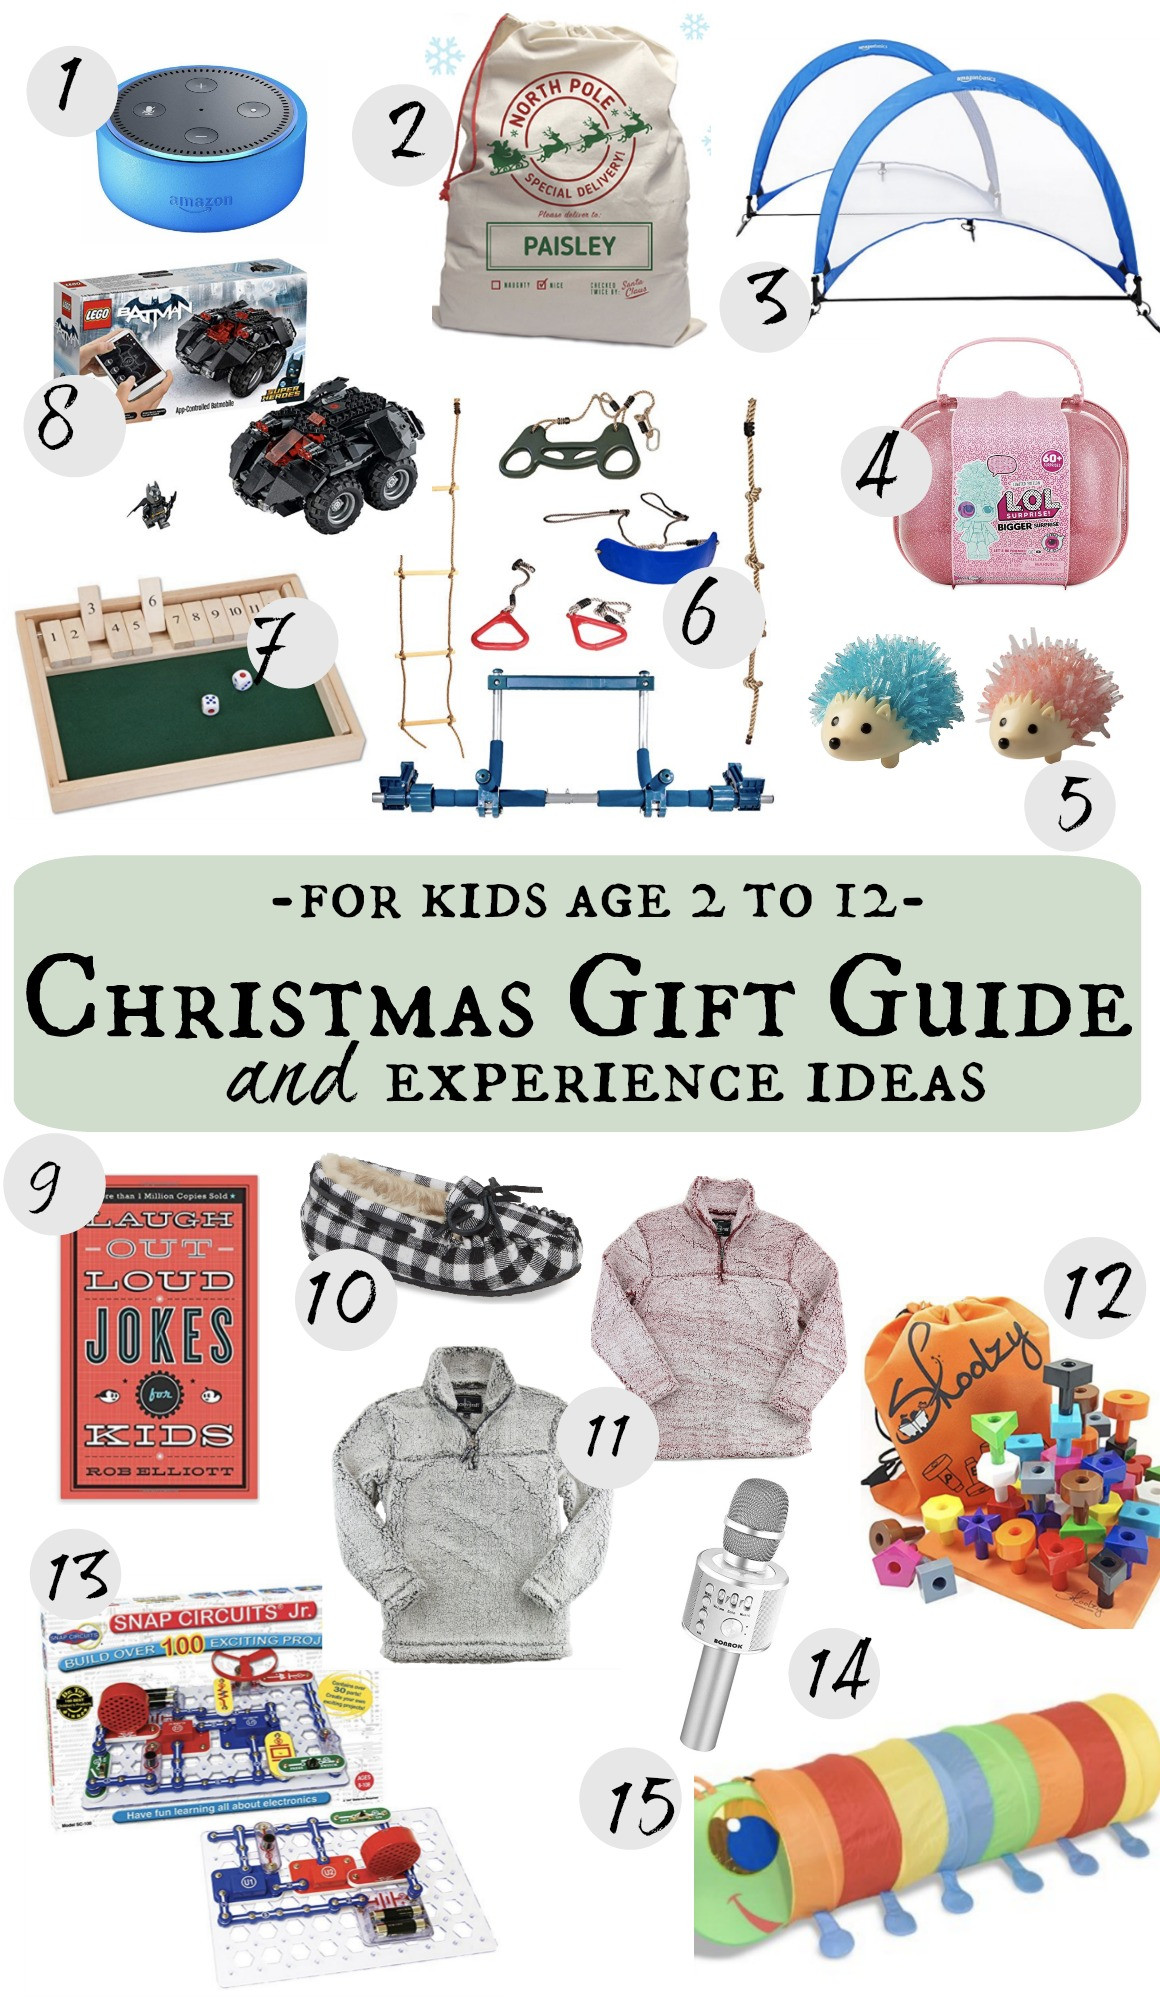 Holiday Gift Guide For Kids
 Christmas Gift Guide for Kids with Experience Ideas too